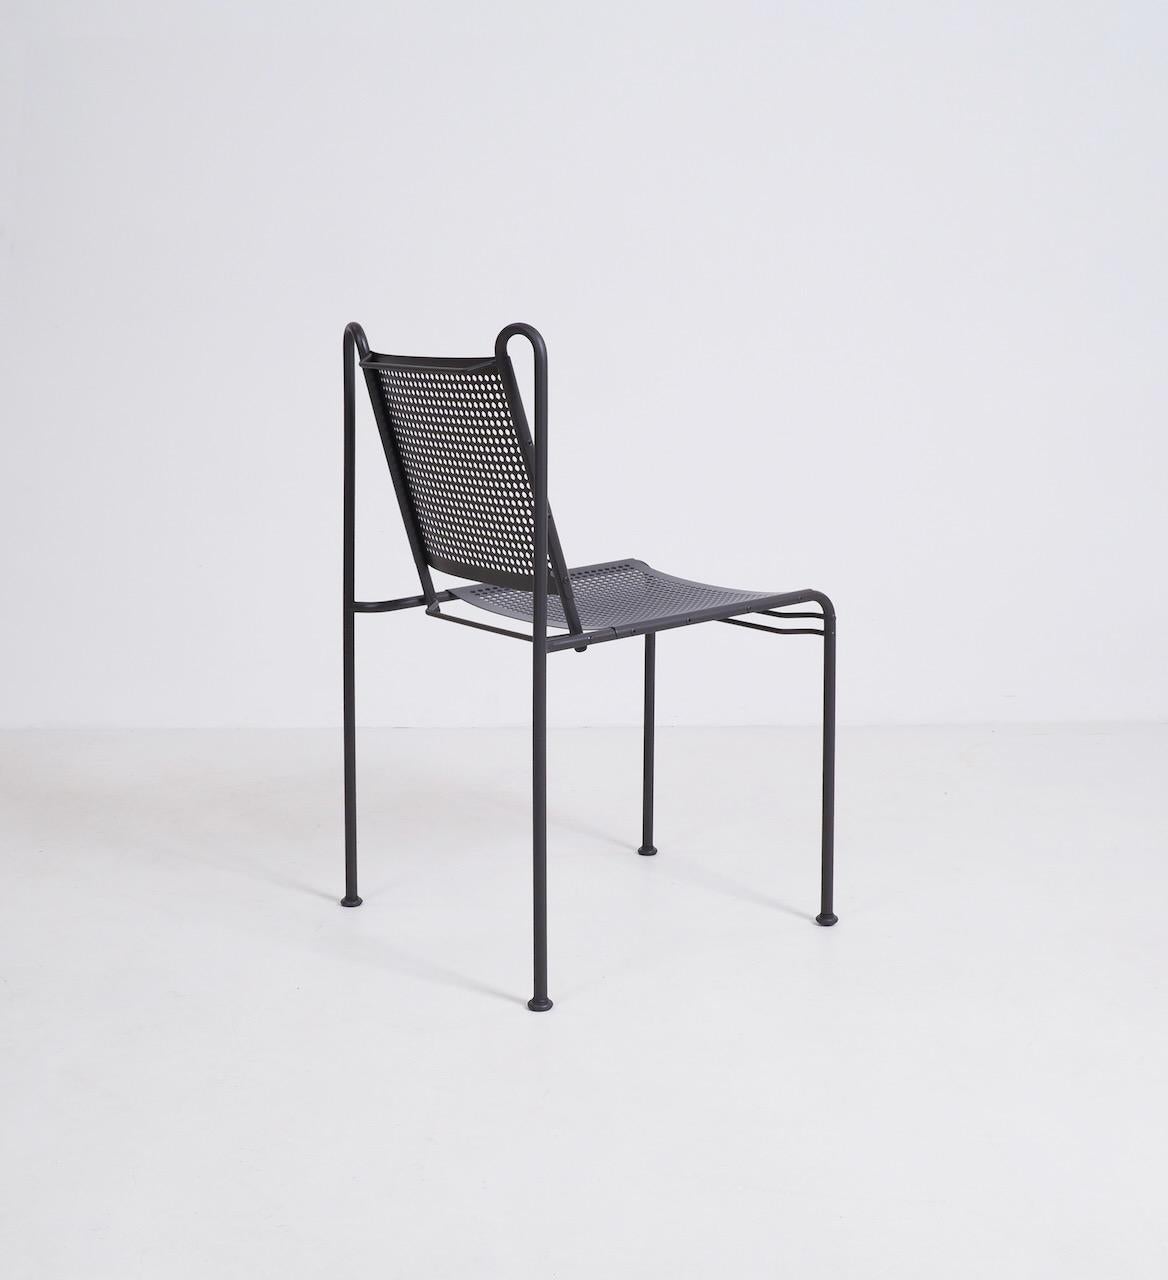 Unusual, perforated steel side chair, circa 1970. Painted in a dark grey with a subtle brown tone. Unattributed. 

2 available. Priced per chair.

Dimensions (cm, approx):
height: 84
width: 50
depth: 50.
 